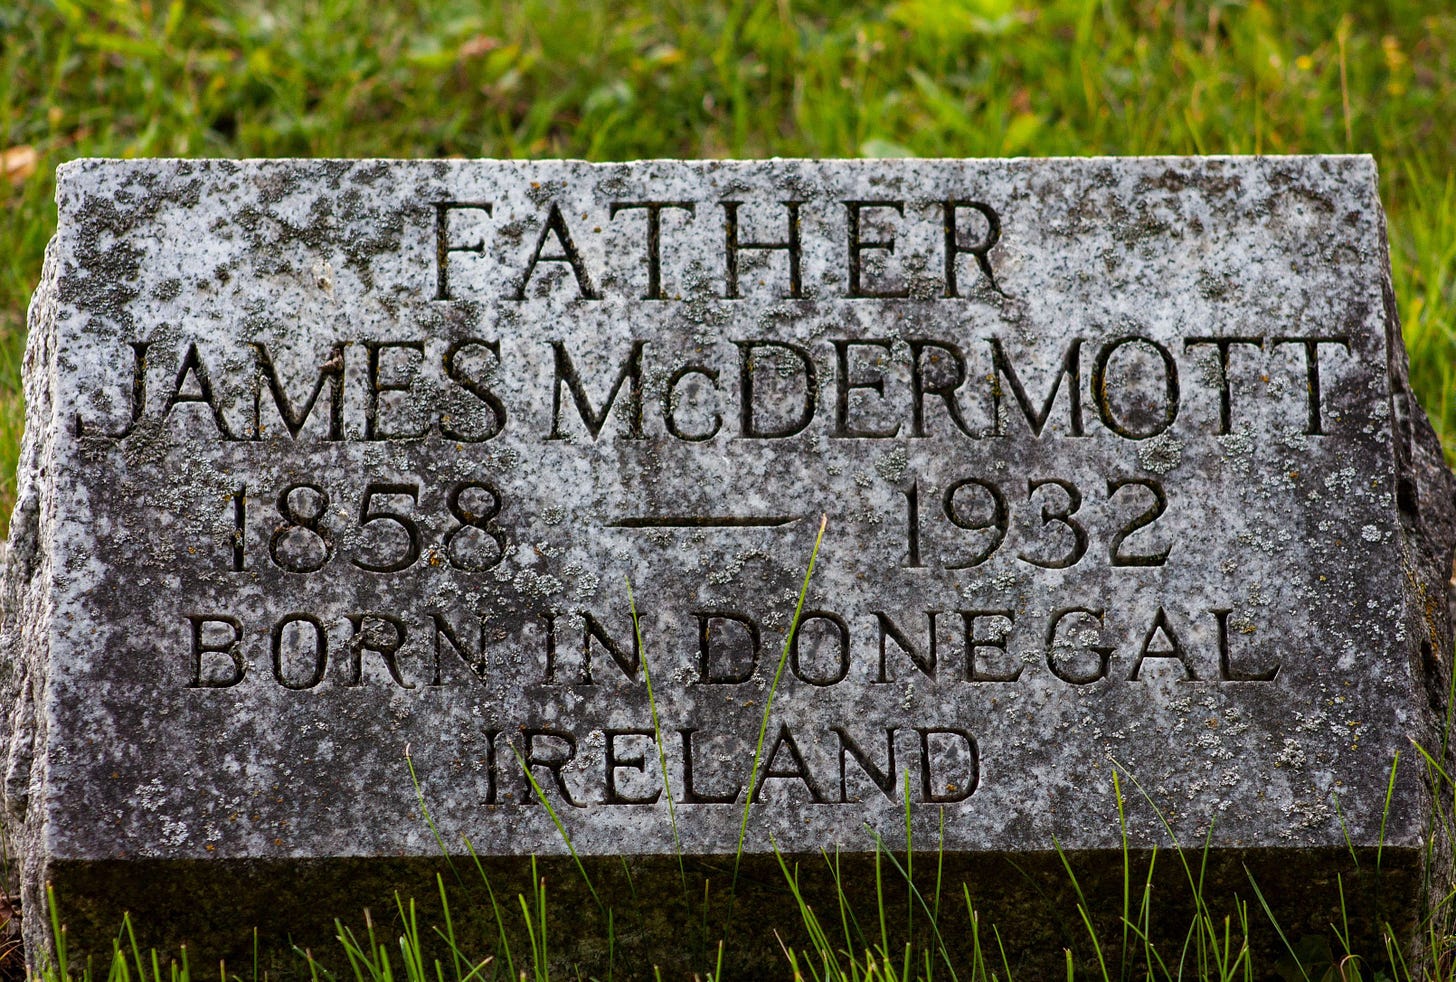 Photo of gravestone for Father James McDermott in the Saint Vincent de Paul Cemetery in Mitchell, Ontario

FATHER 
JAMES McDERMOTT
1858 — 1932
BORN IN DONEGAL
IRELAND

https://www.findagrave.com/memorial/208586065/james-mcdermott

This work © 2023 by Brad McKay is licensed under Attribution-NonCommercial-NoDerivatives 4.0 International

https://creativecommons.org/licenses/by-nc-nd/4.0/